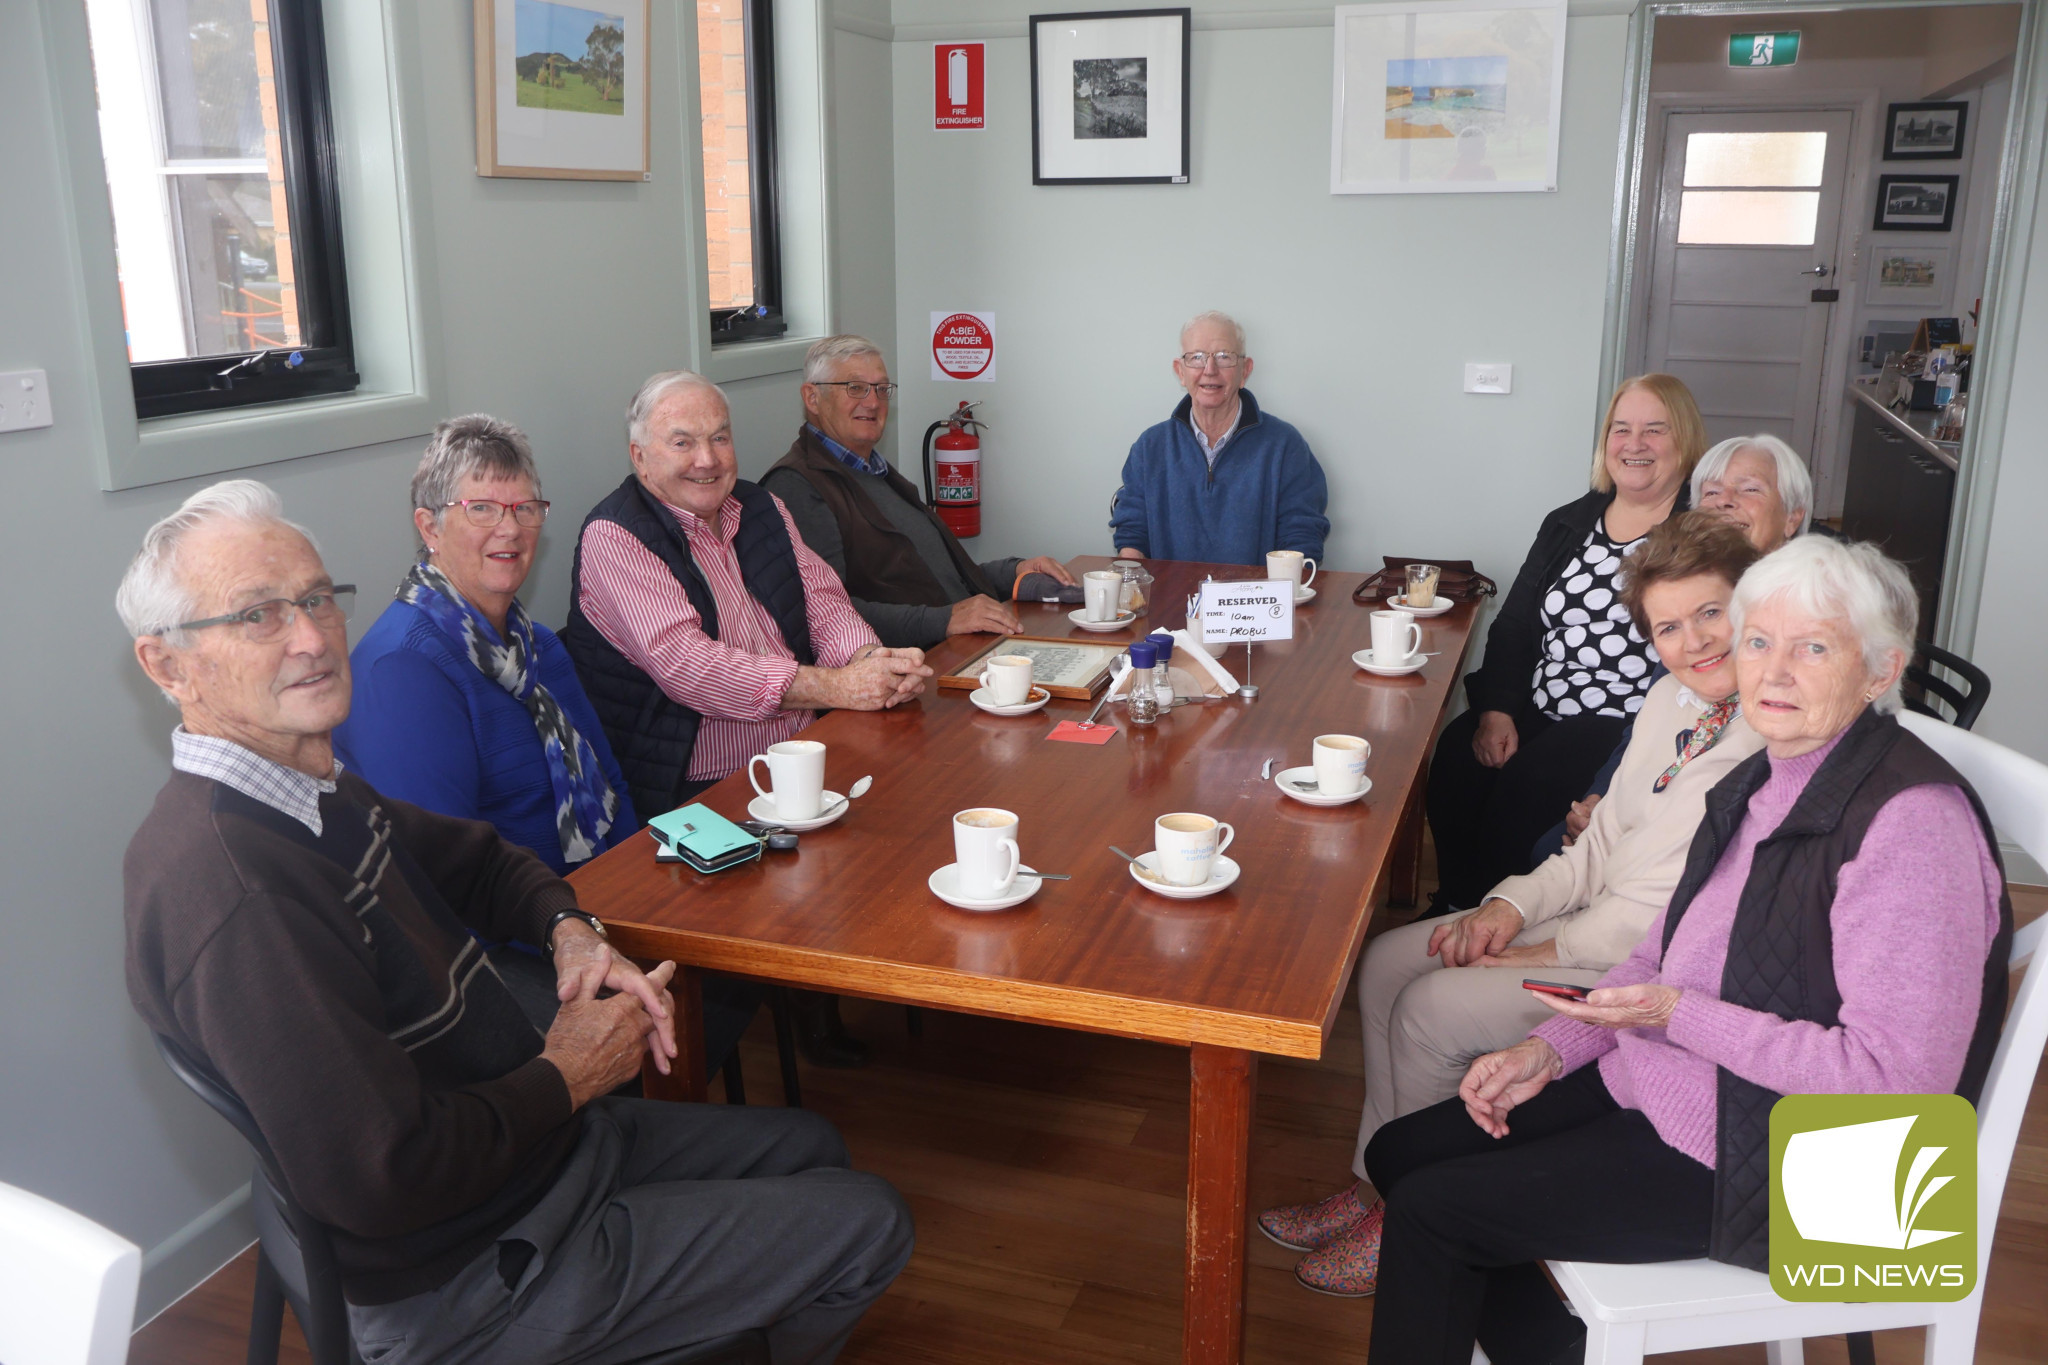 Would you like to join?: Terang and District Probus Club has invited the wider community to consider becoming members. Pictured are Terang and District Probus Club members at a recent meeting of the birthday club, celebrating another year for the members born in May.